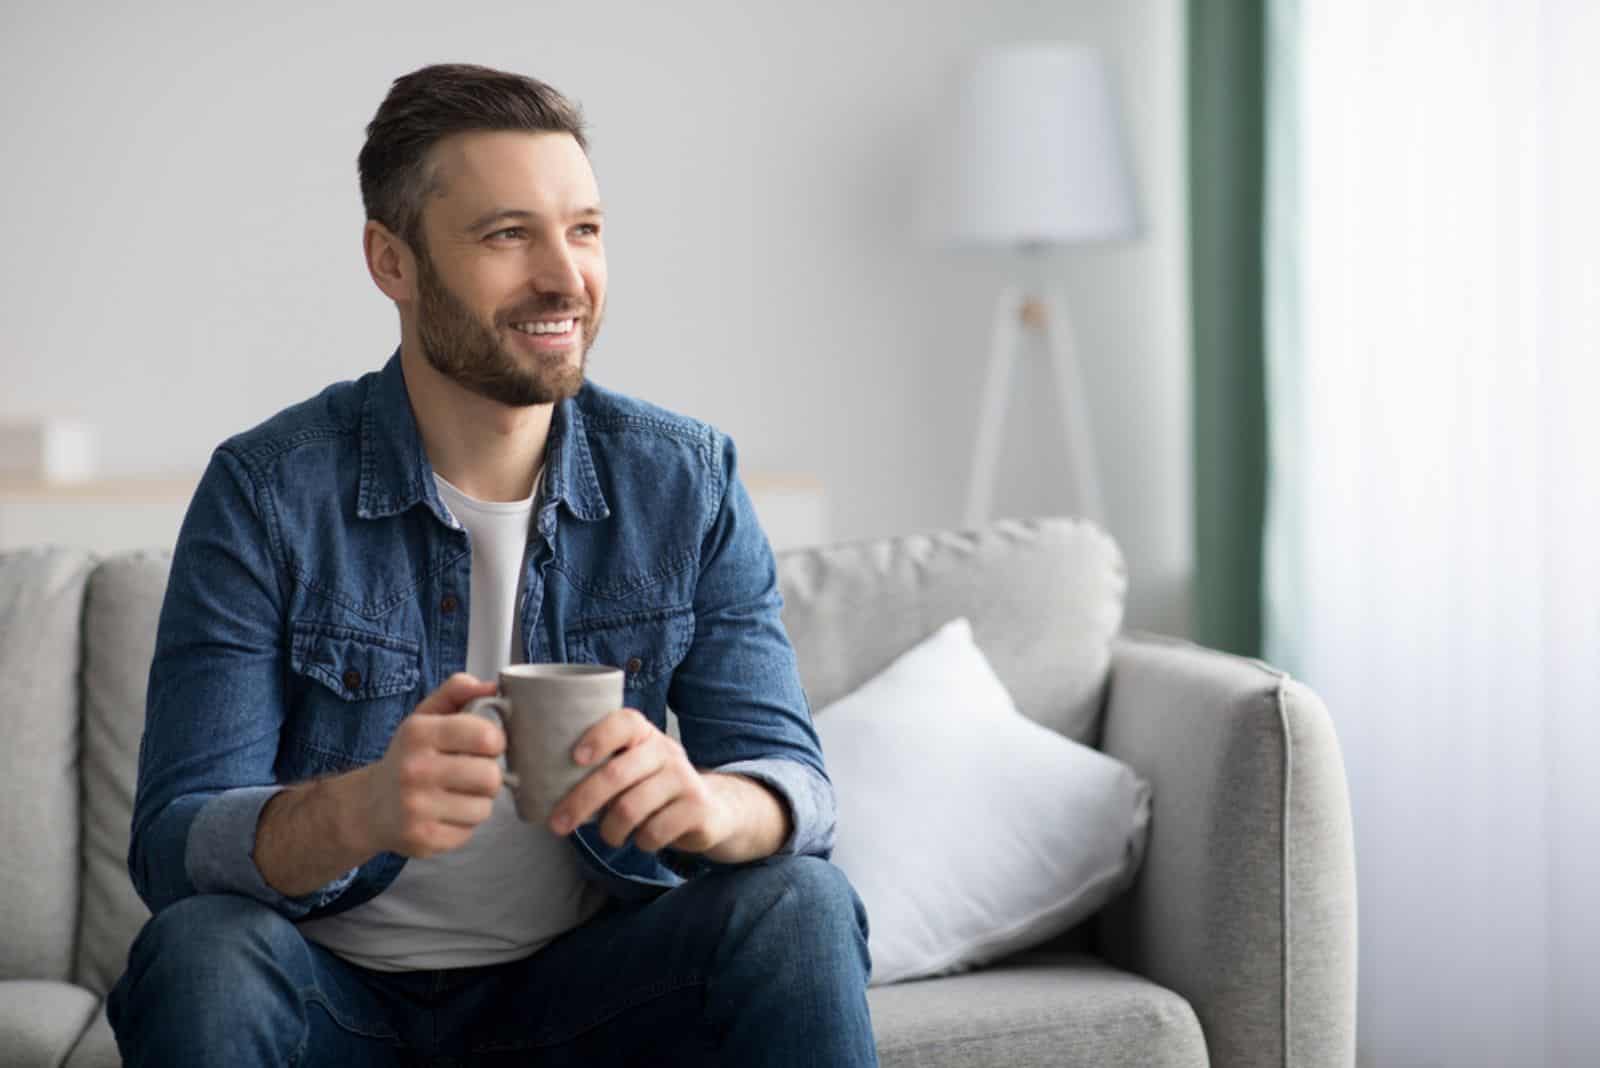 a smiling man is sitting on the couch and holding a cup in his hand